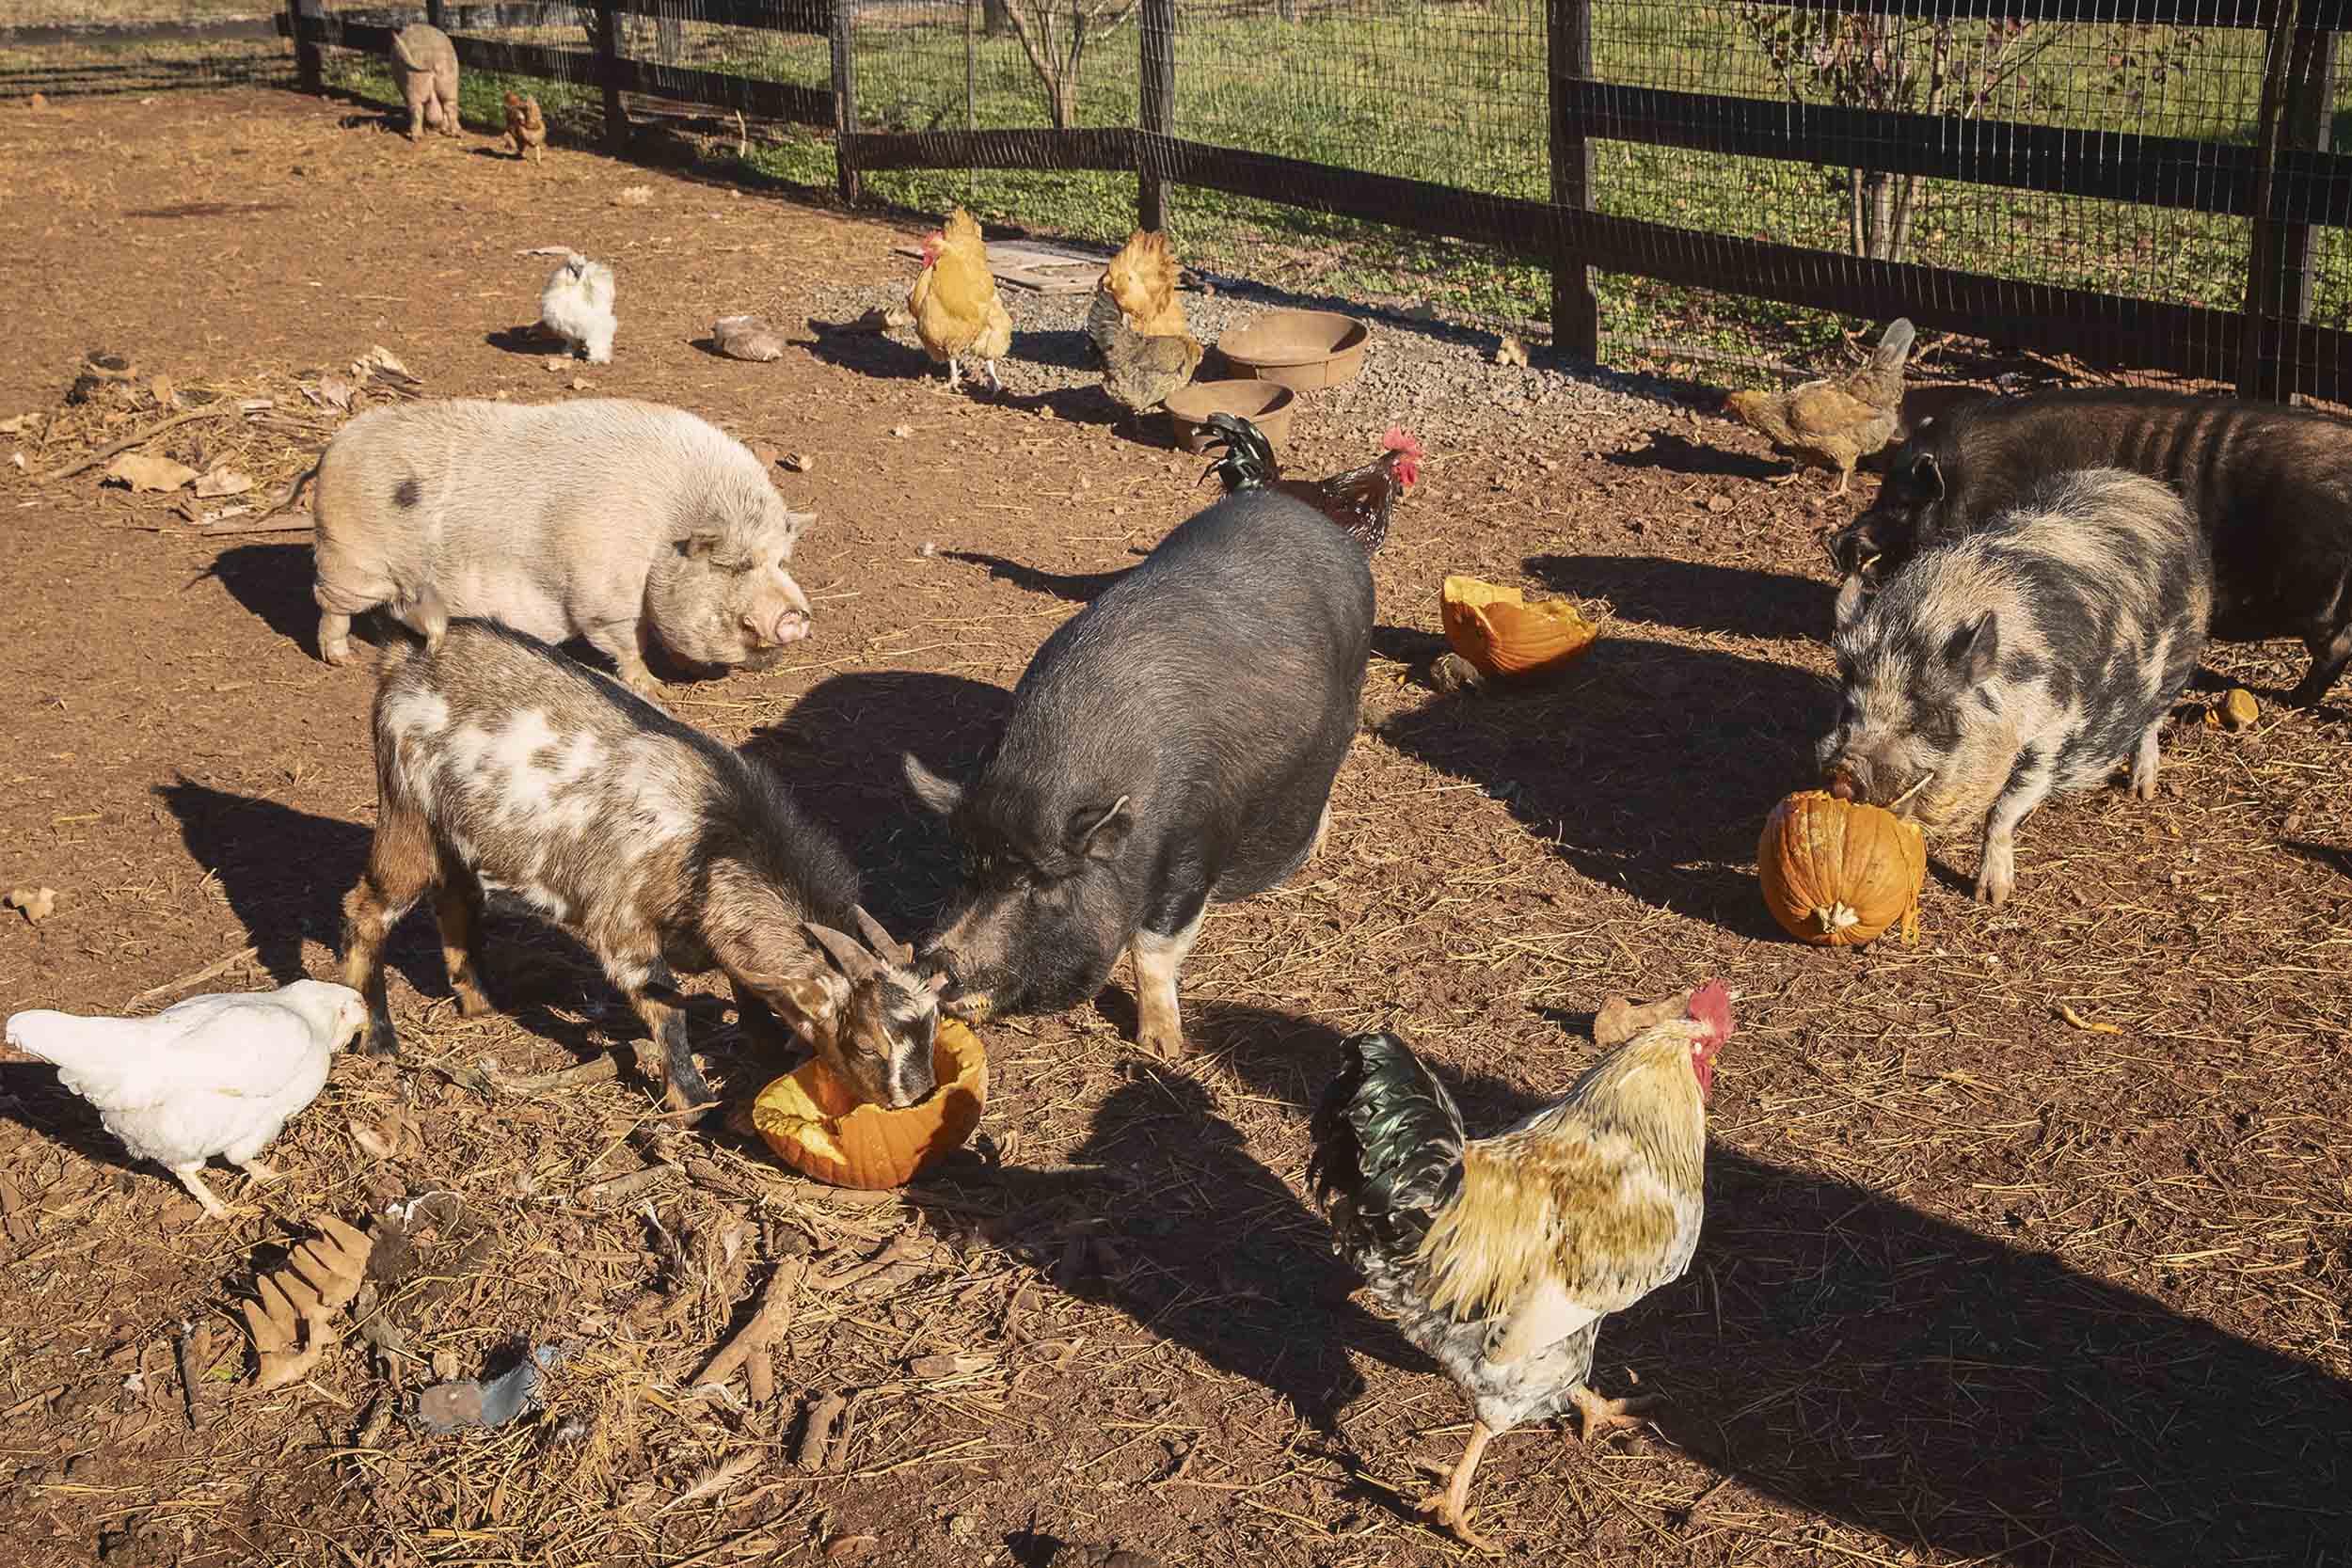 chickens, pigs, and goats eating pumpkins in pens